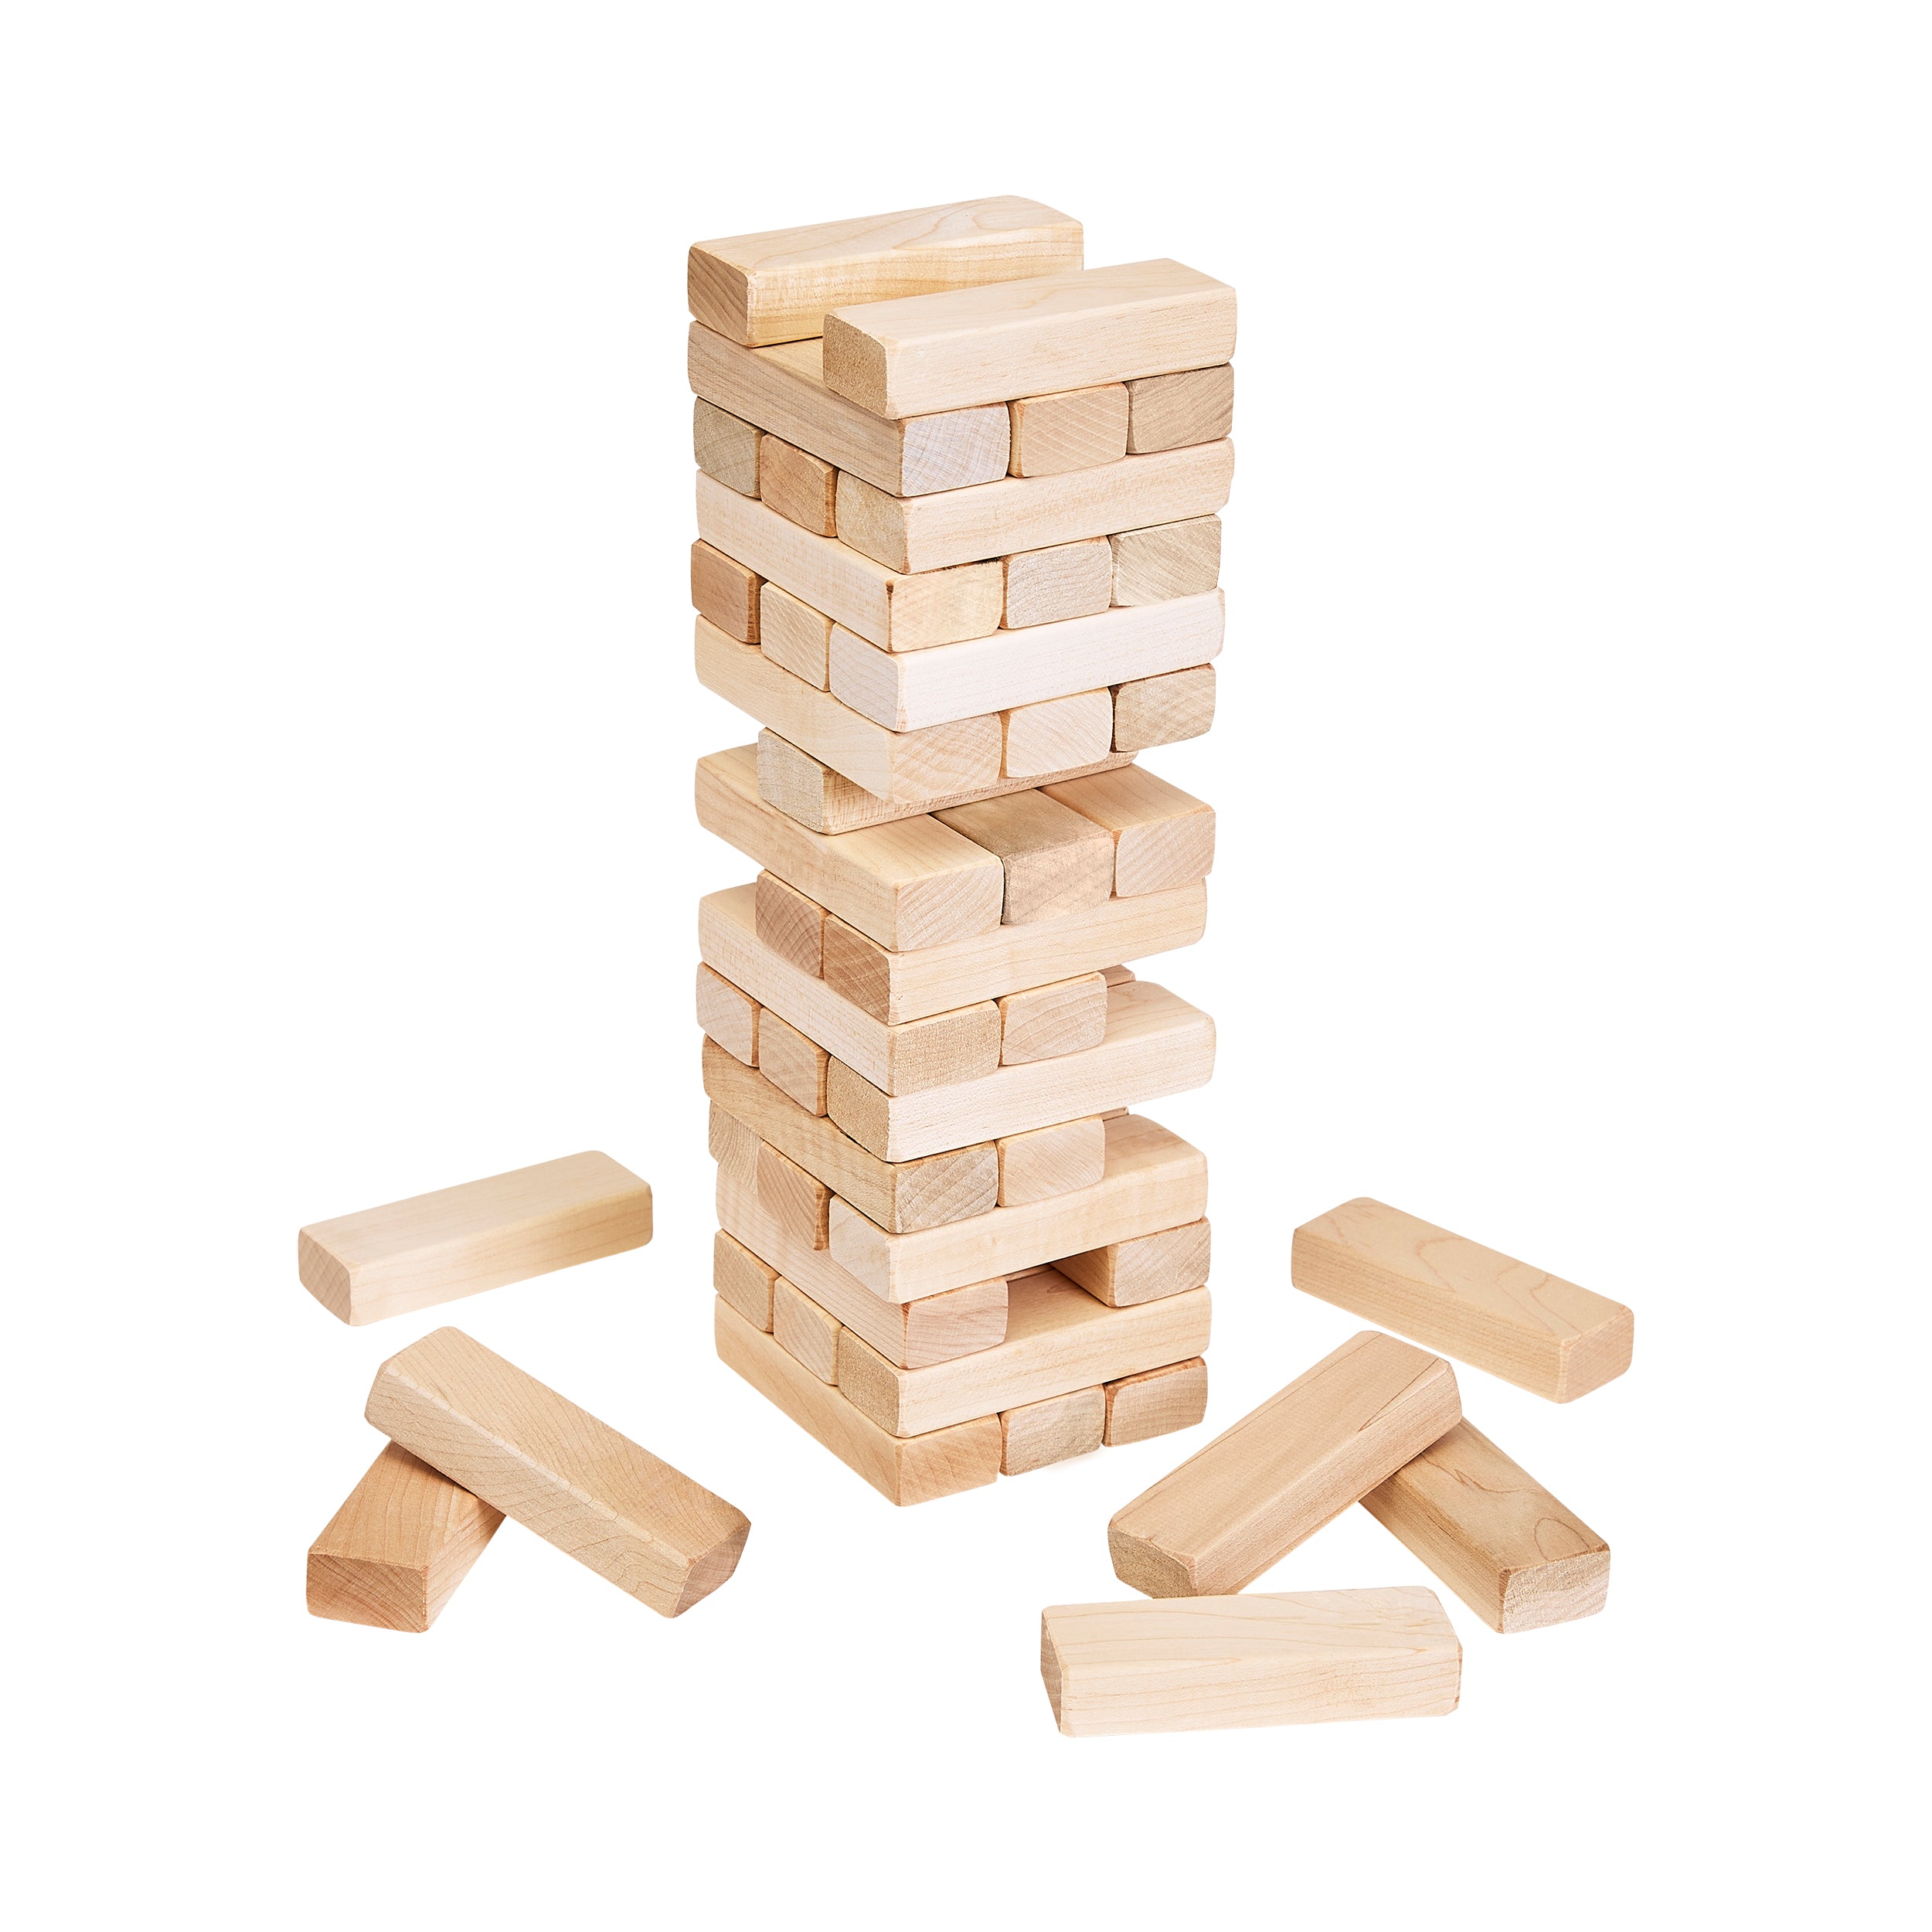 Pennsylvania Woodworks Maple Tumble Tower Game - Heavy Duty Timber Tower  Wooden Block Set - Stackable Hardwood Blocks - Tabletop & Outdoor Family